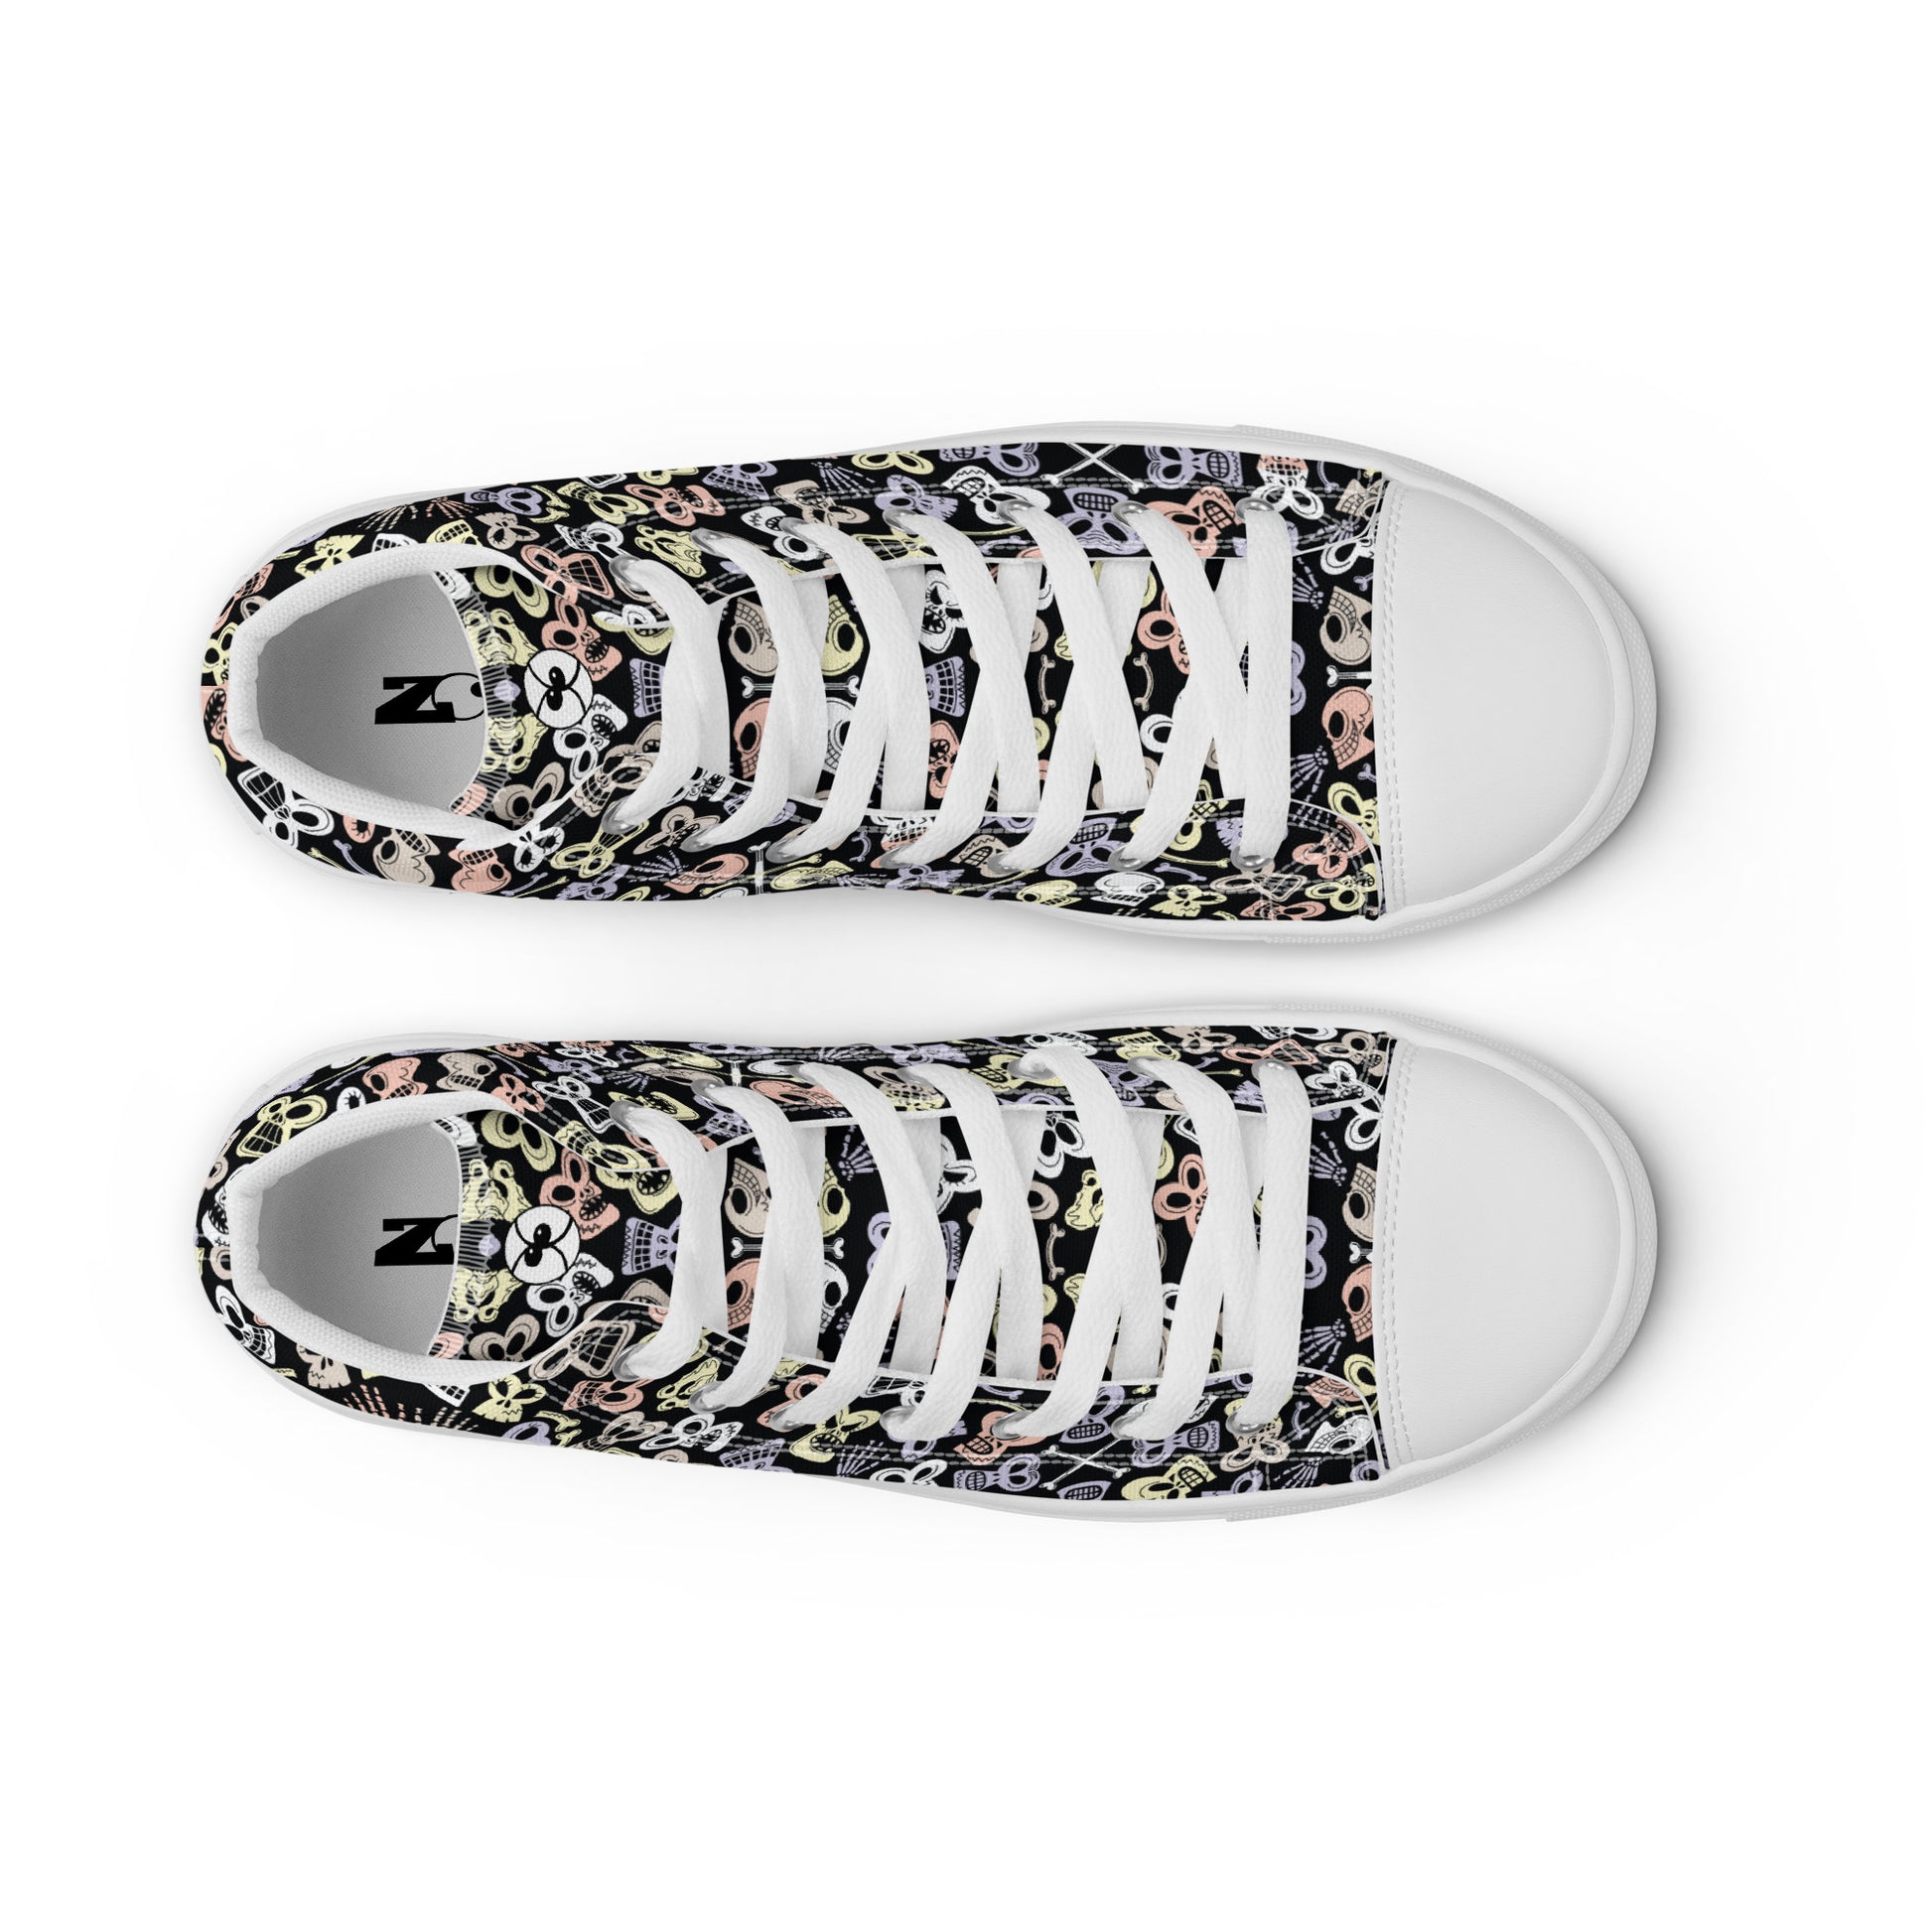 Bewitched Skulls: Hauntingly Chic Pattern Design - Women’s high top canvas shoes. White color. Top view